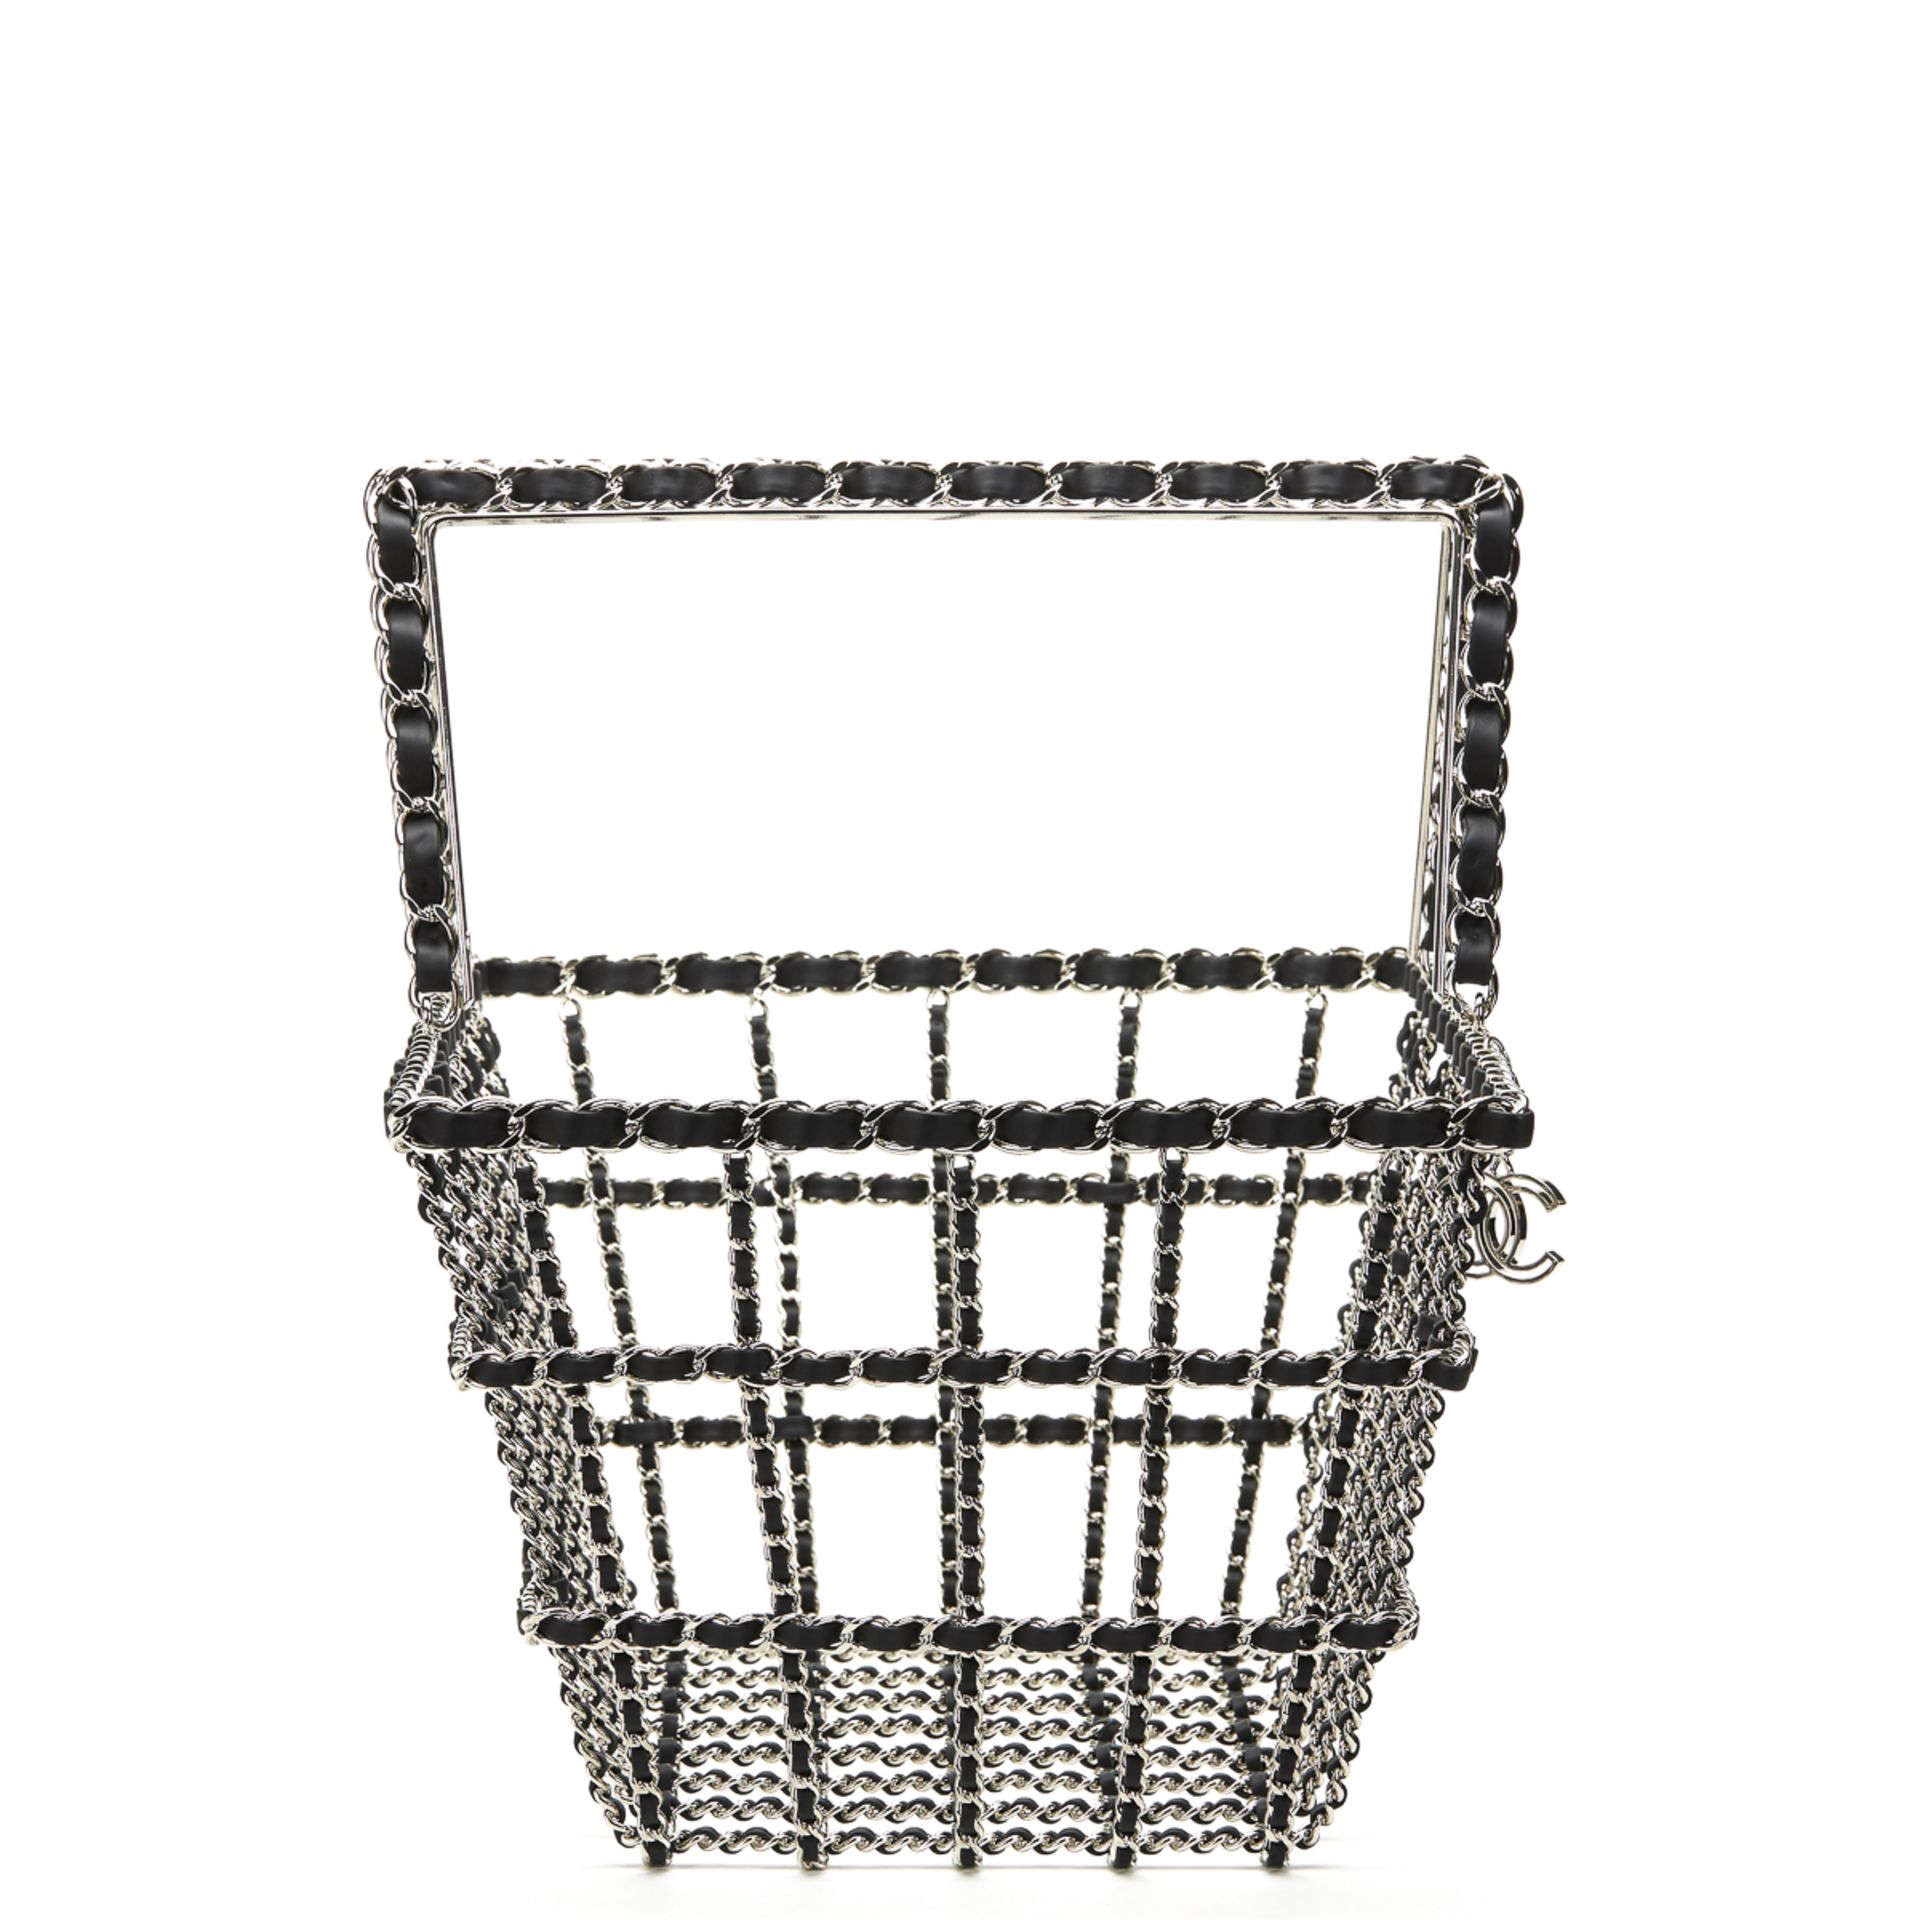 Silver & Black Calfskin Leather Fall 2014 Act 2 Basket Bag - Image 5 of 9